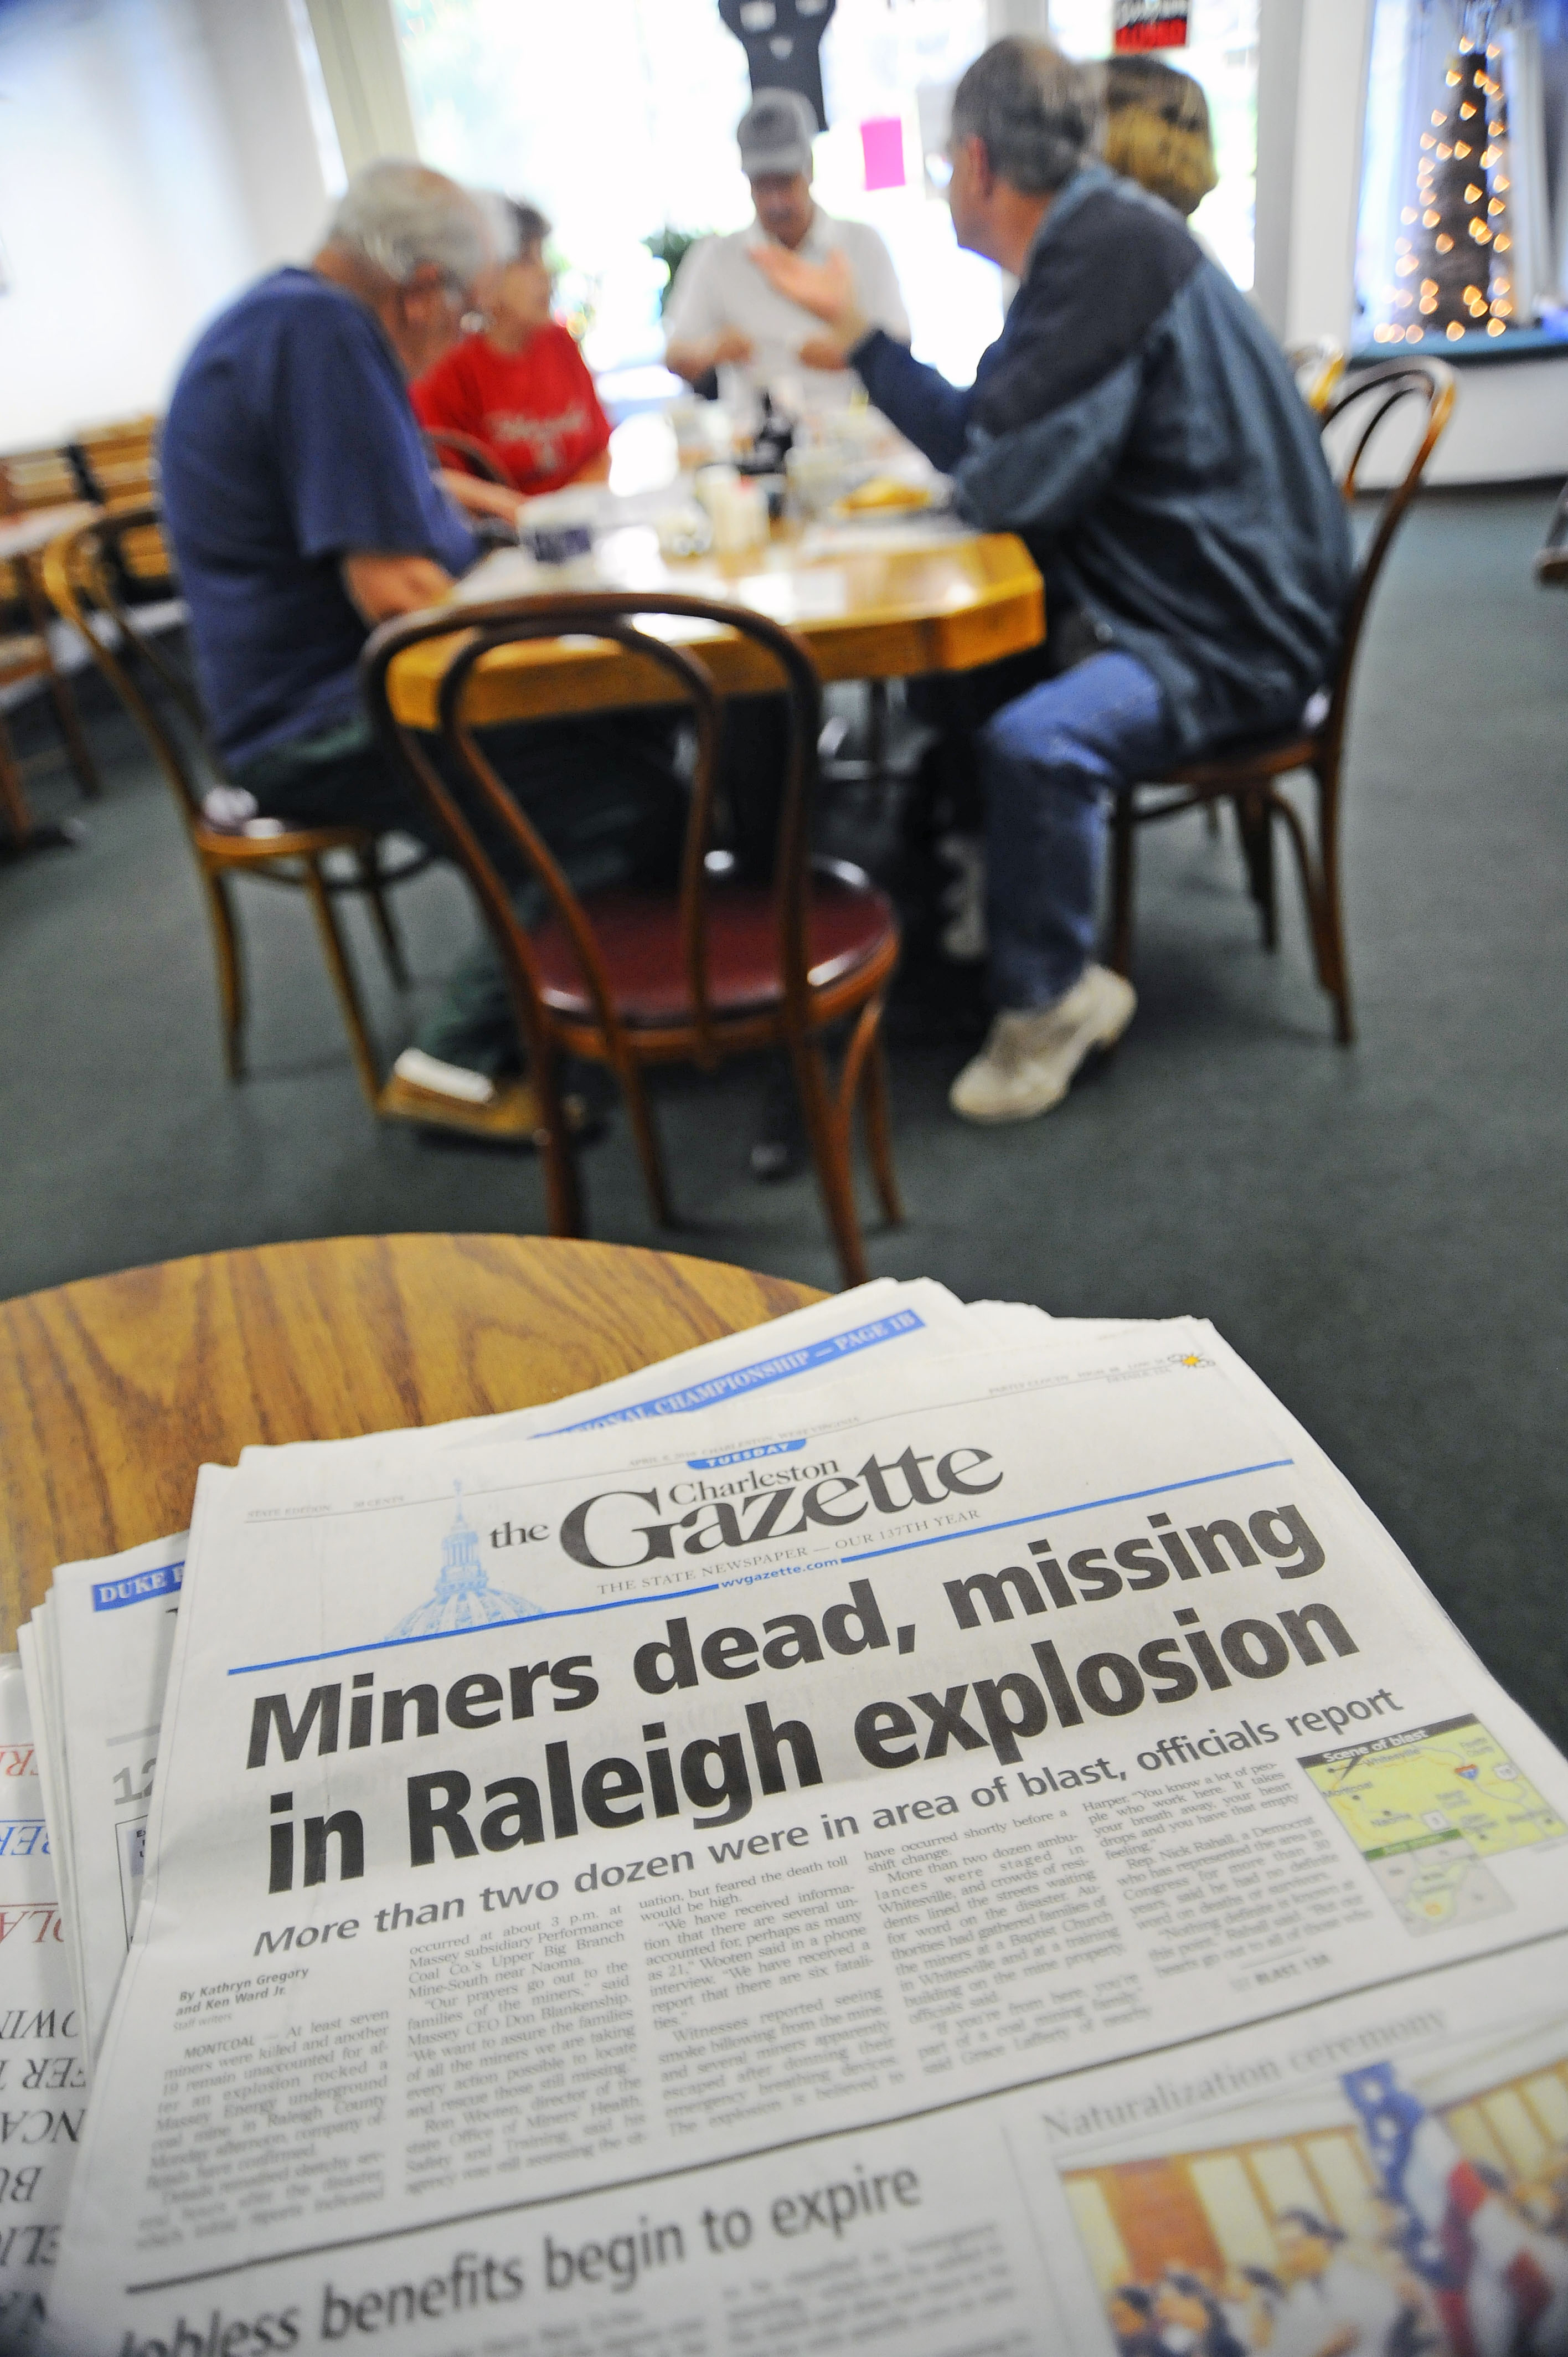 A 2010 issue of The Charleston (W.Va.) Gazette after an explosion killed 29 miners. In recognition of the importance of local newspapers, the West Virginia Press Association and West Virginia University are leading a new effort to train newspaper publishers